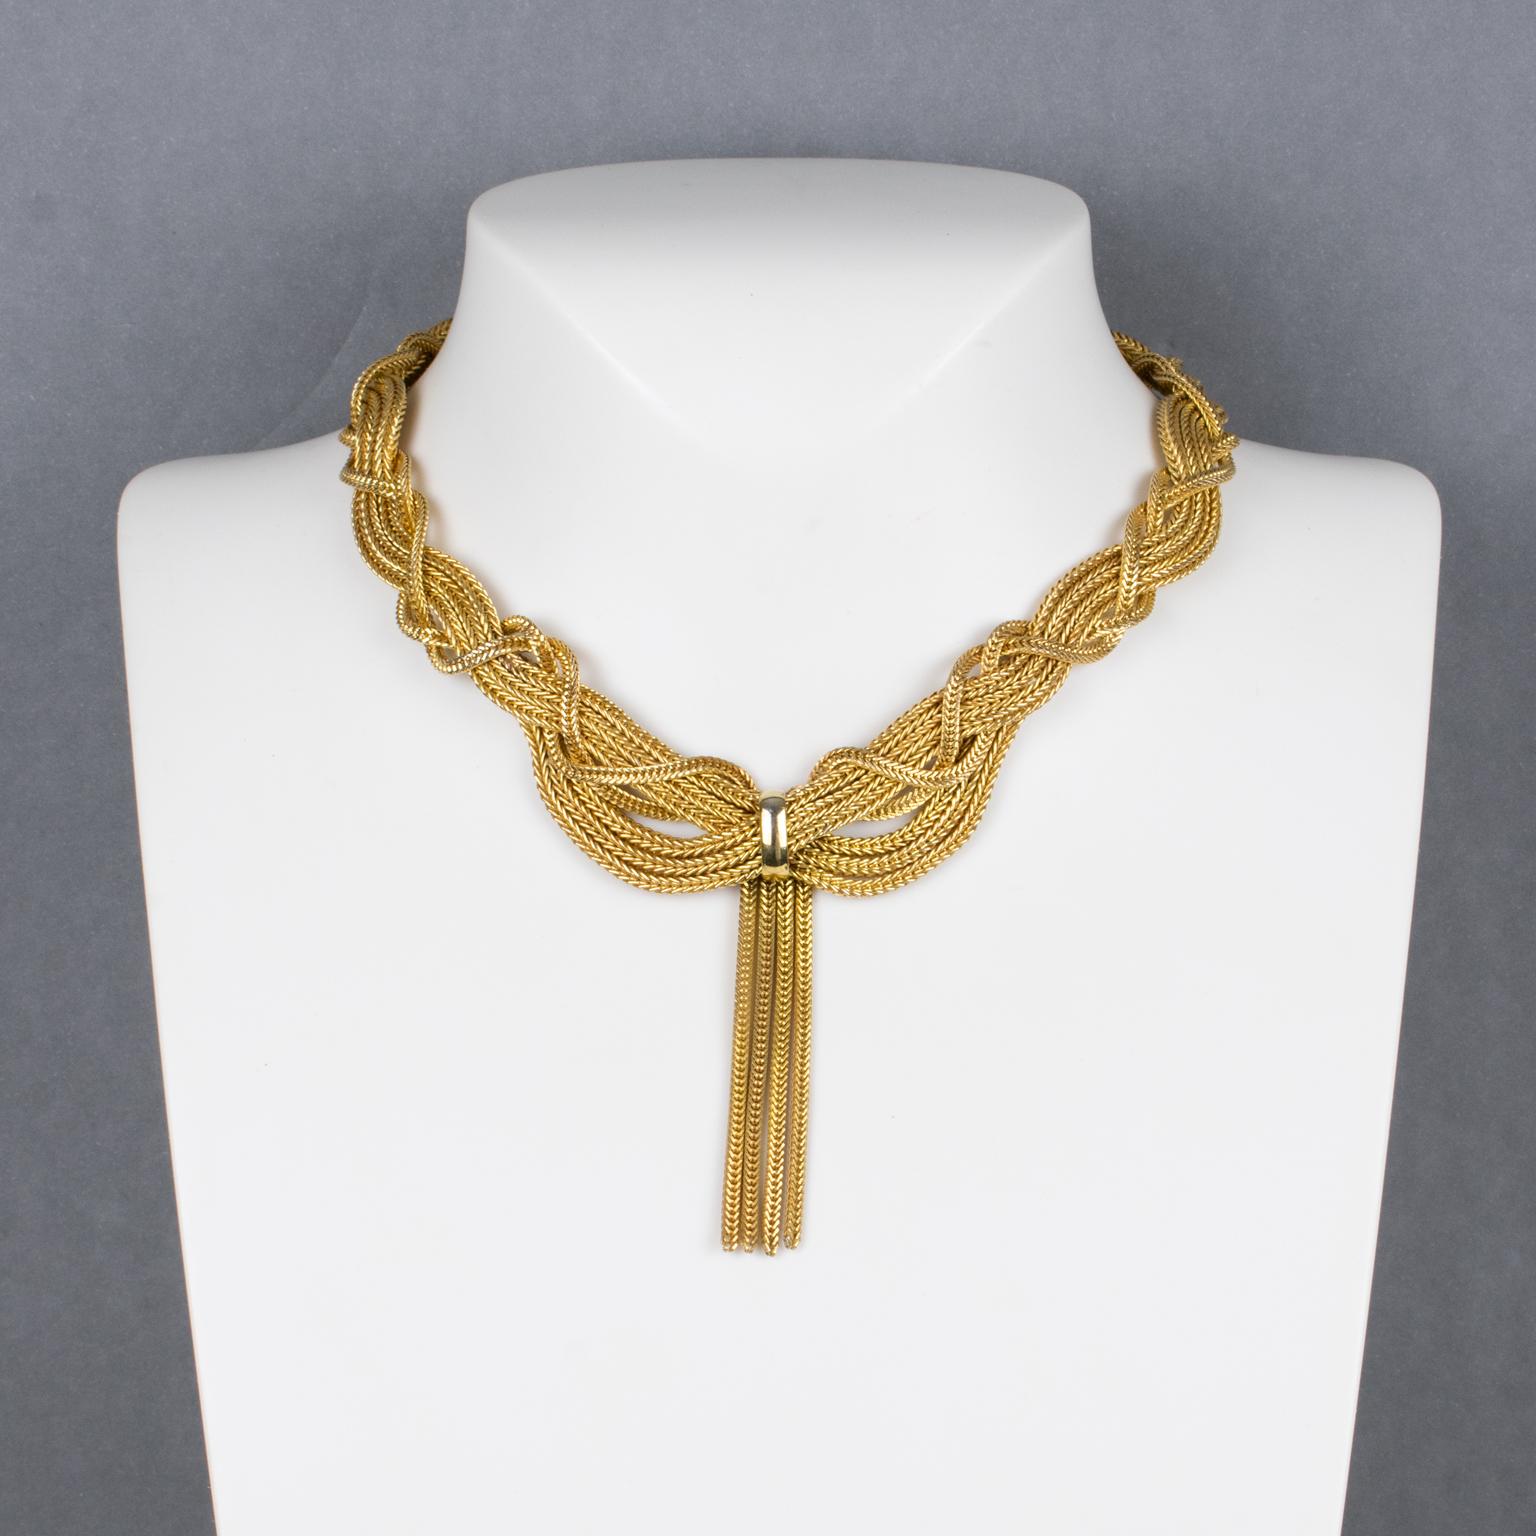 Modern Christian Dior by Grosse 1958 Gilded Metal Braided Choker Necklace For Sale